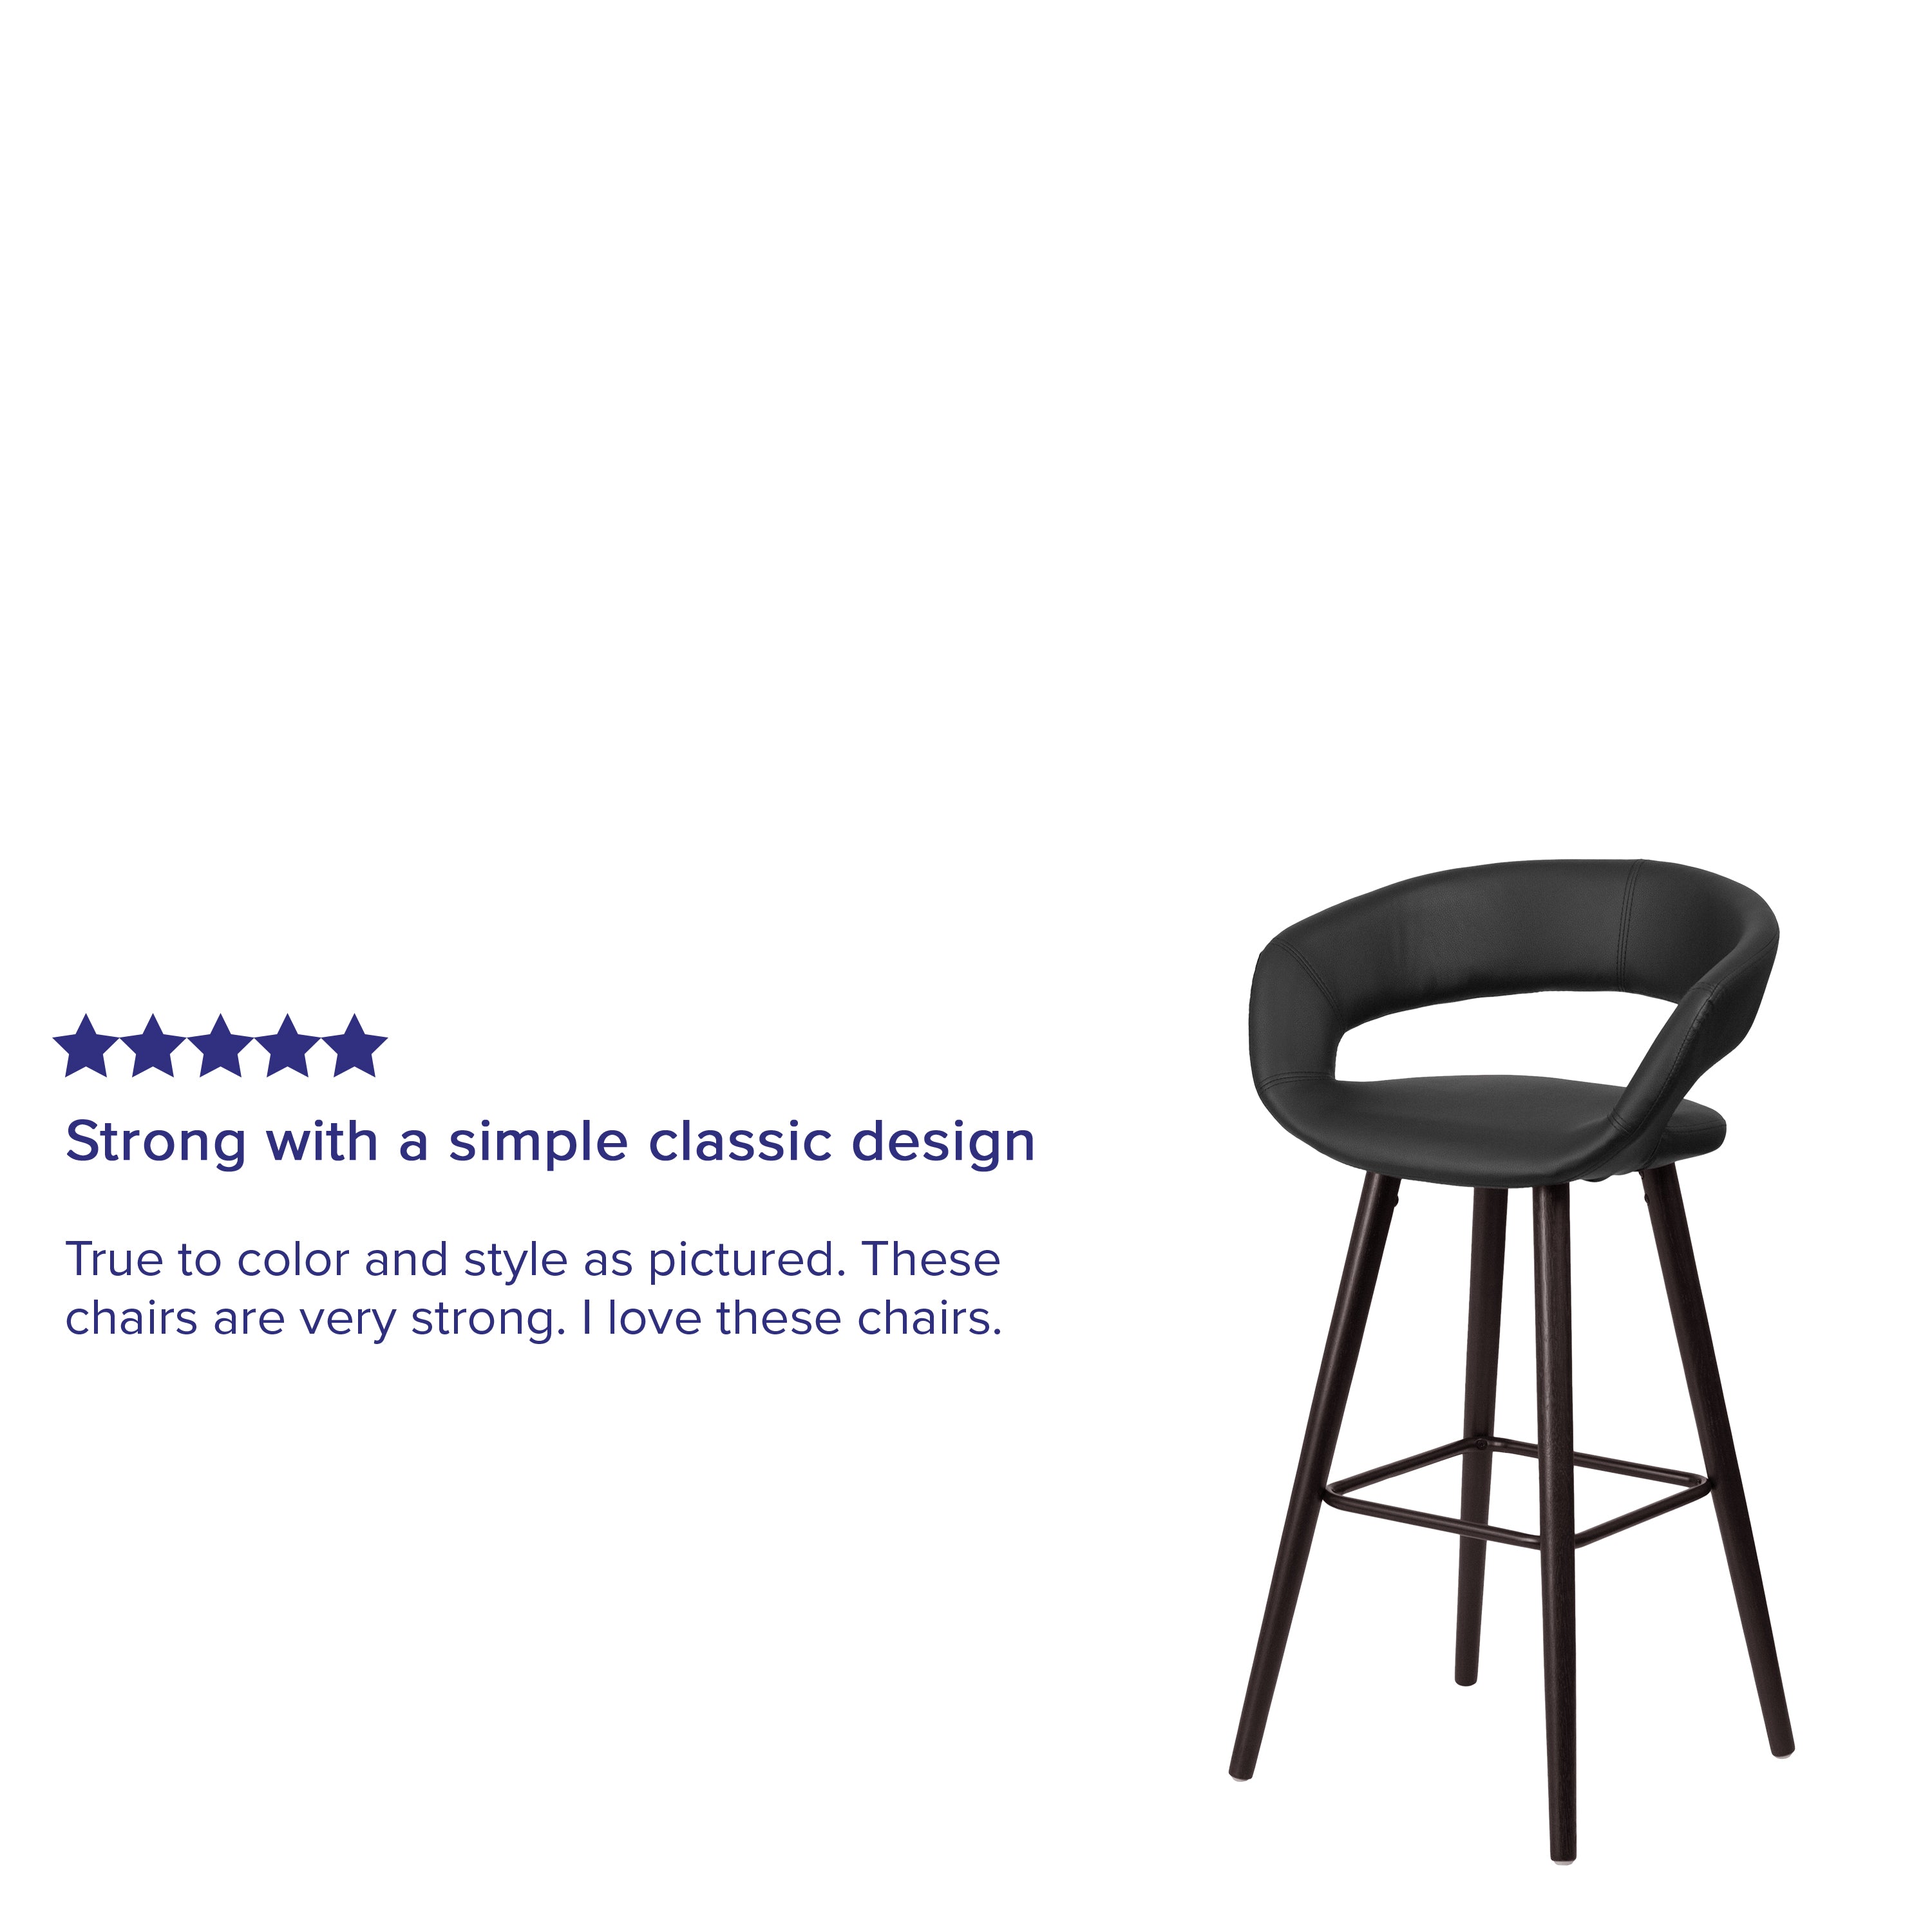 Brynn Series 29'' High Contemporary Vinyl Rounded Back Barstool with Cappuccino Wood Frame-Bar Stool-Flash Furniture-Wall2Wall Furnishings